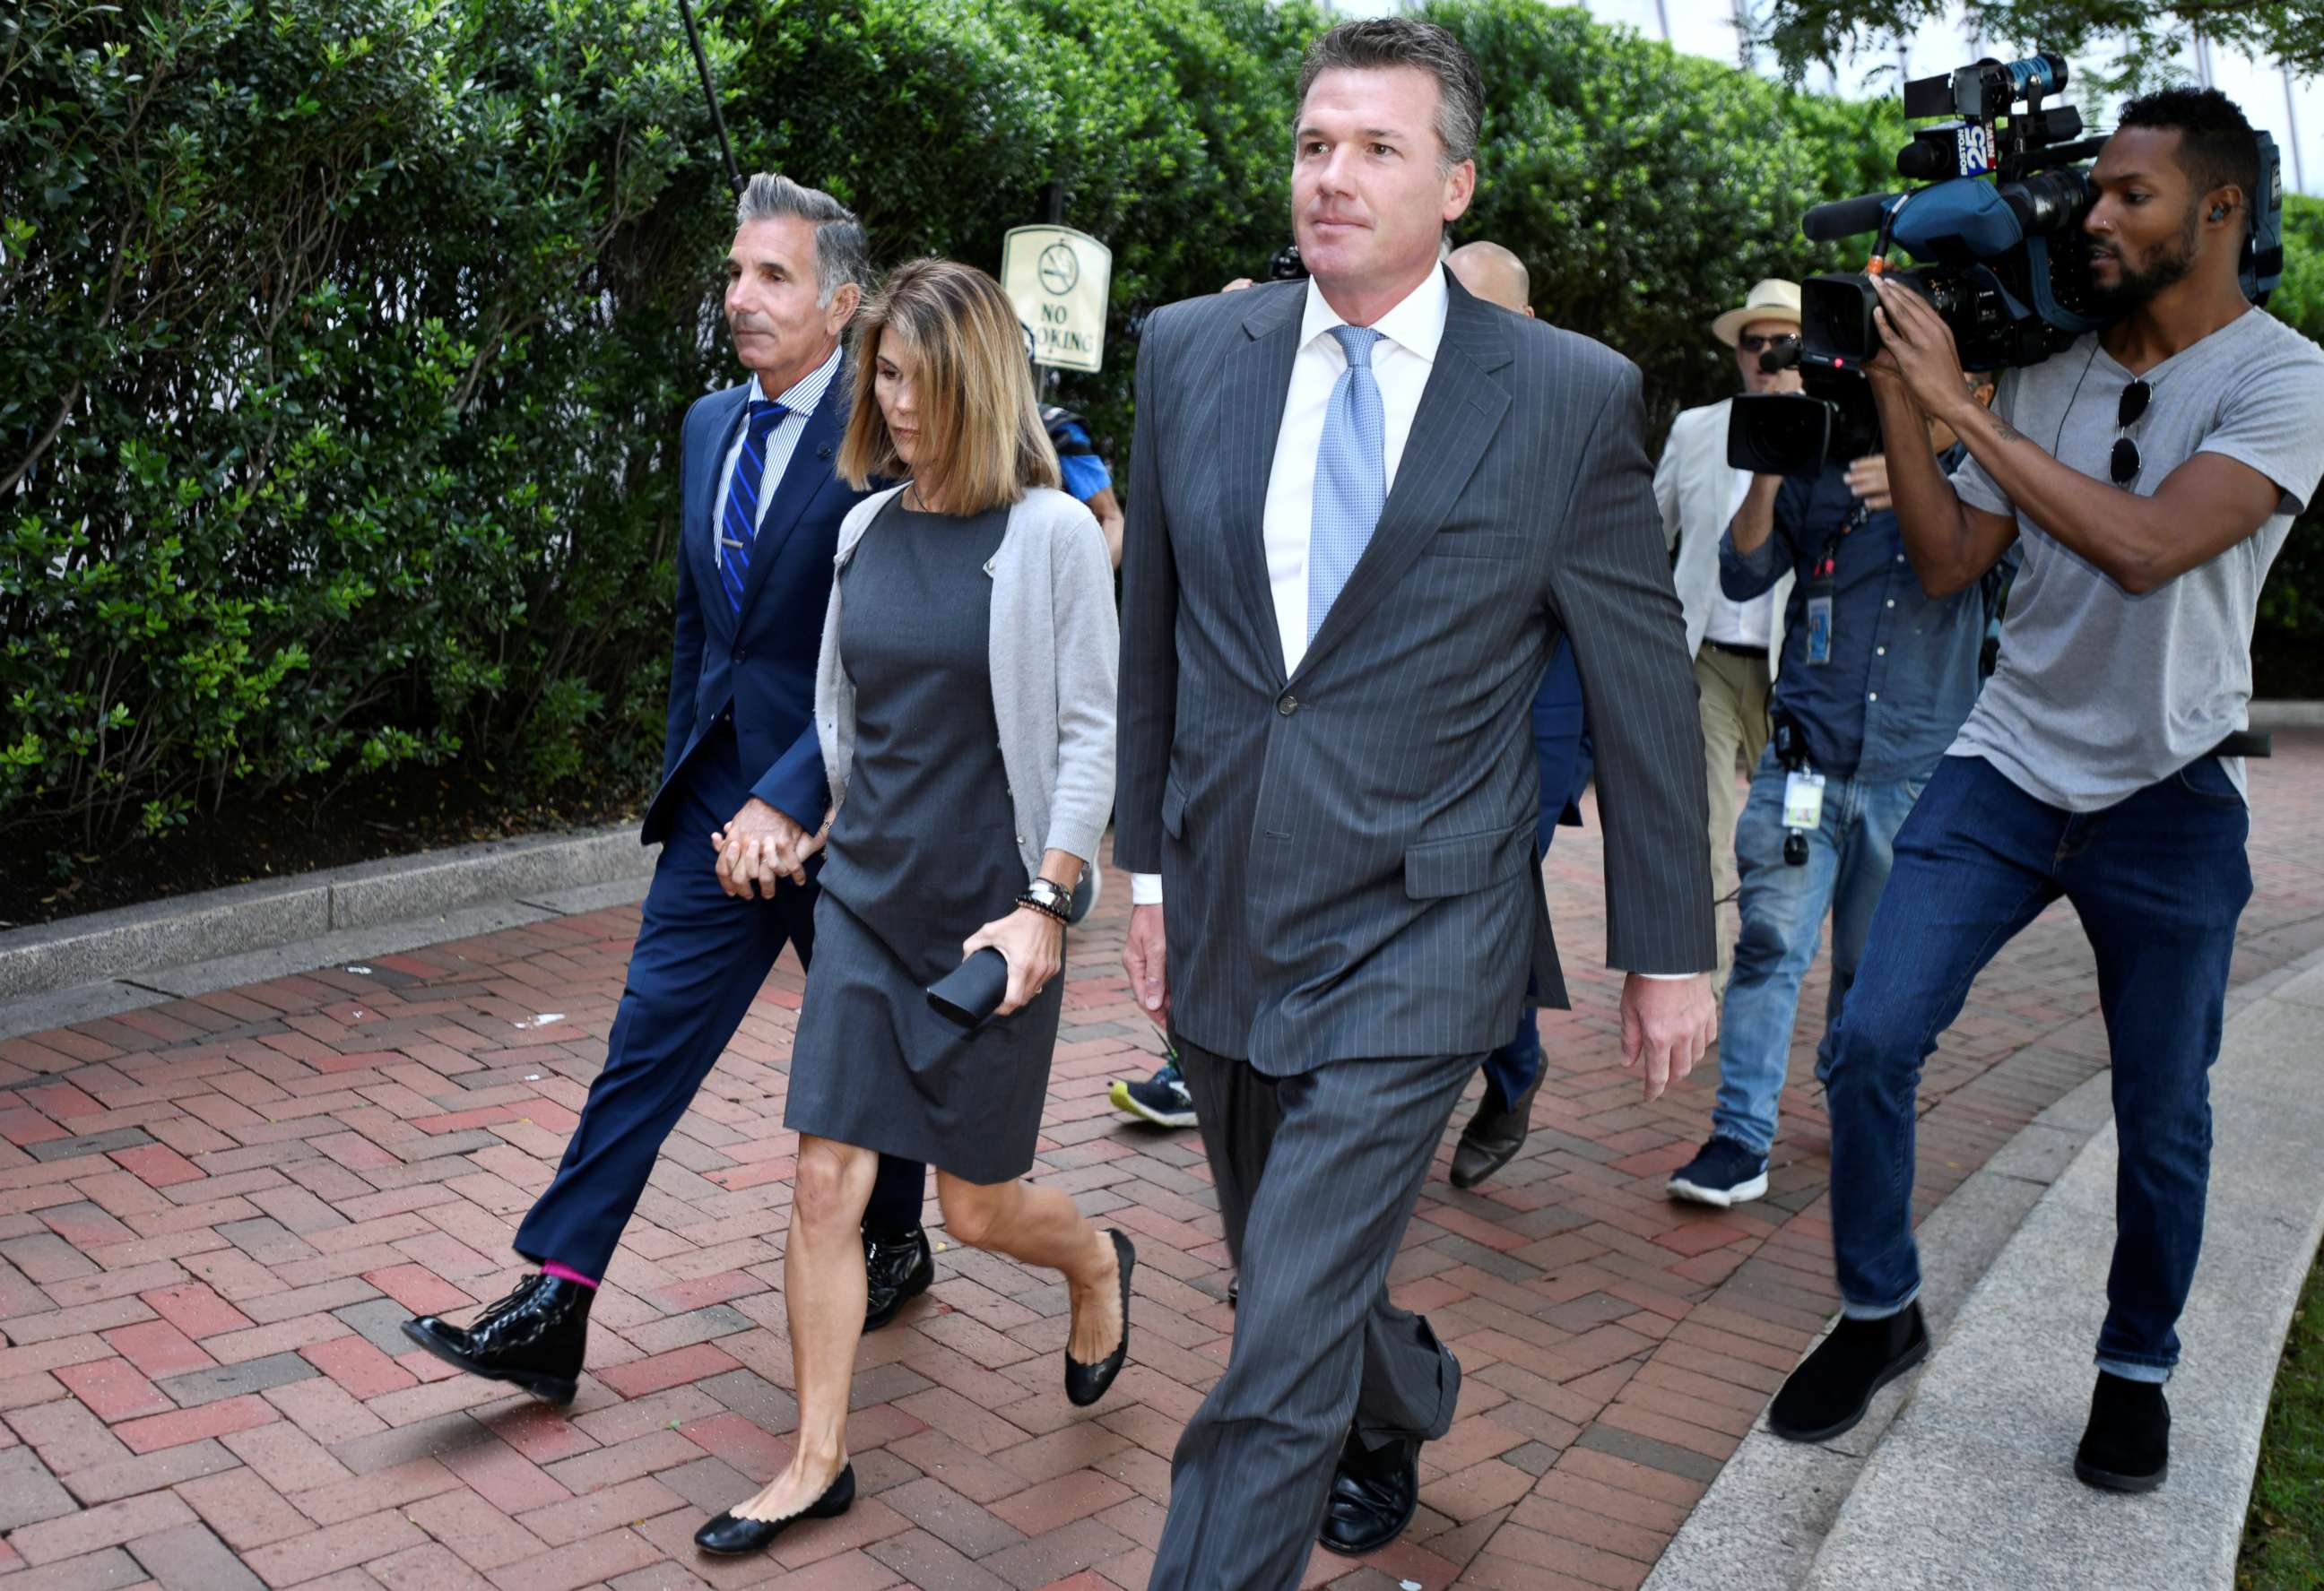 PHOTO: Actress Lori Loughlin and her husband, Mossimo Giannulli, arrive at the federal courthouse for a hearing on charges in a nationwide college admissions cheating scheme in Boston, Aug. 27, 2019.